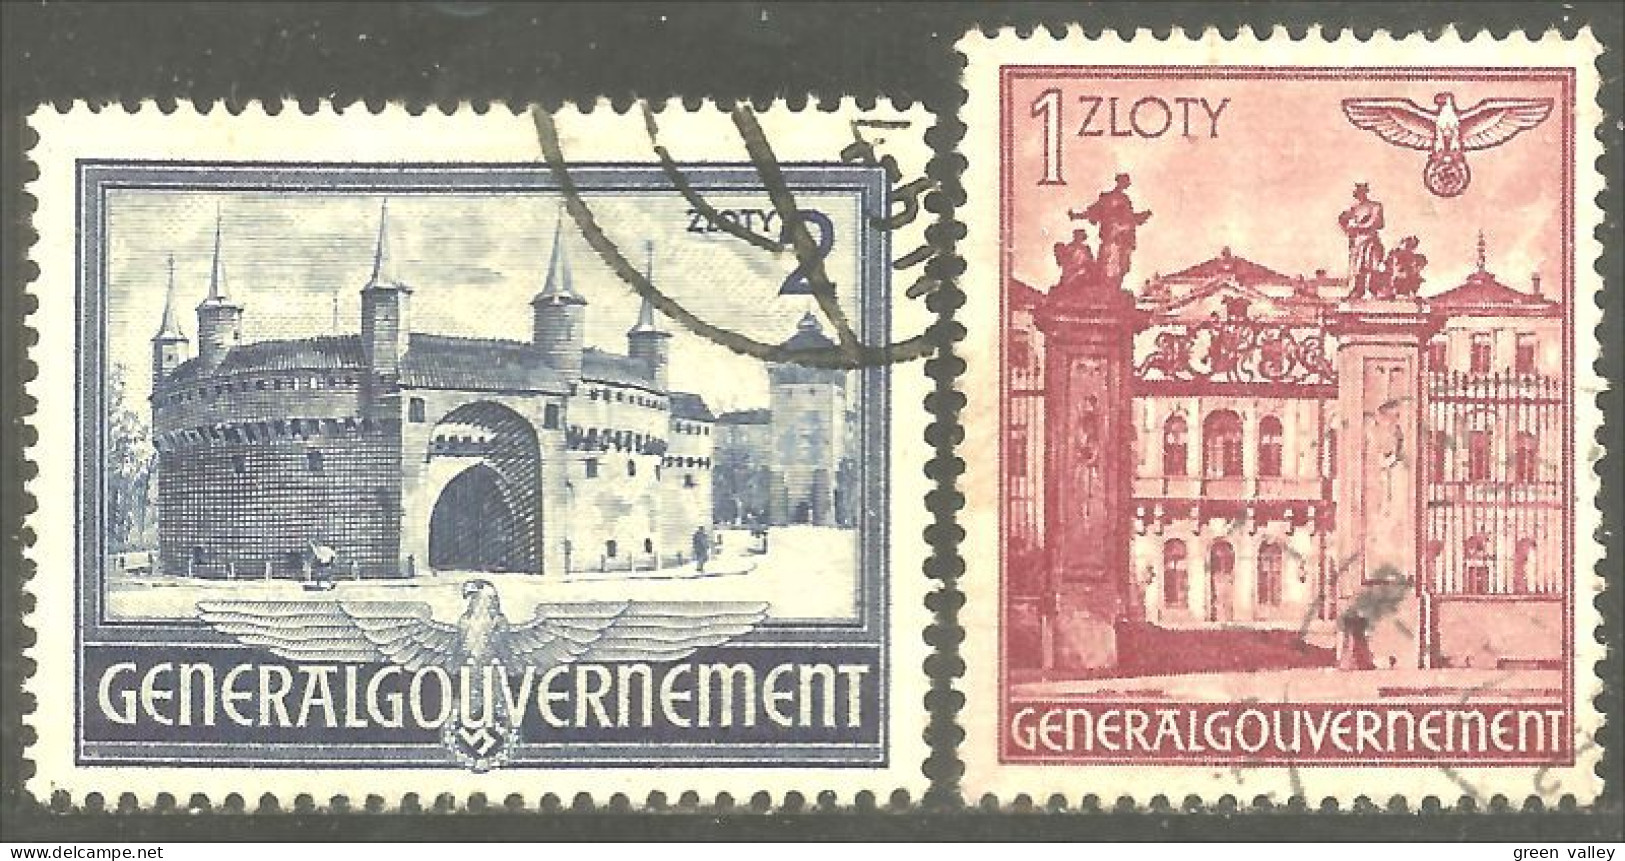 740 Pologne Rondel Porte Florian Gate Cracow Cracovie Palais Varsovie Warsaw Palace (POL-351) - General Government